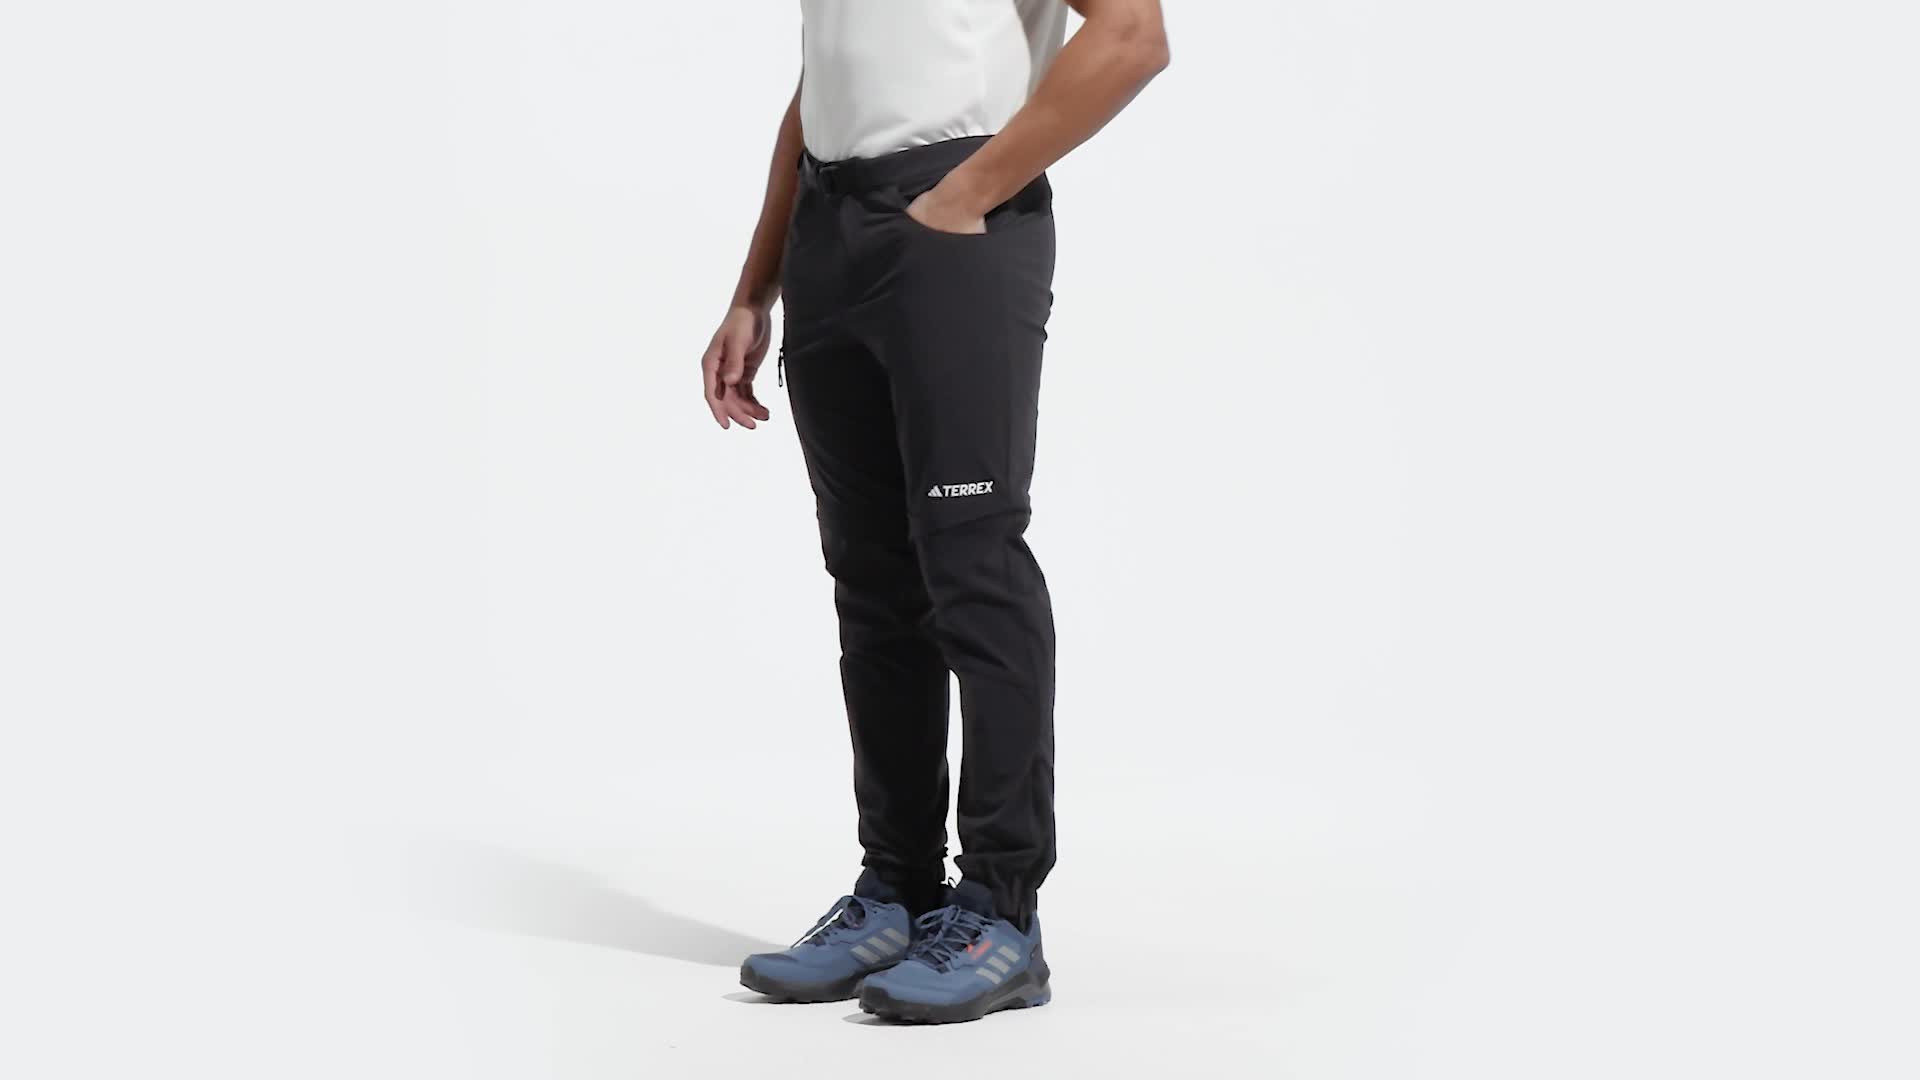 adidas Own the Run Astro Pants - Save 58%